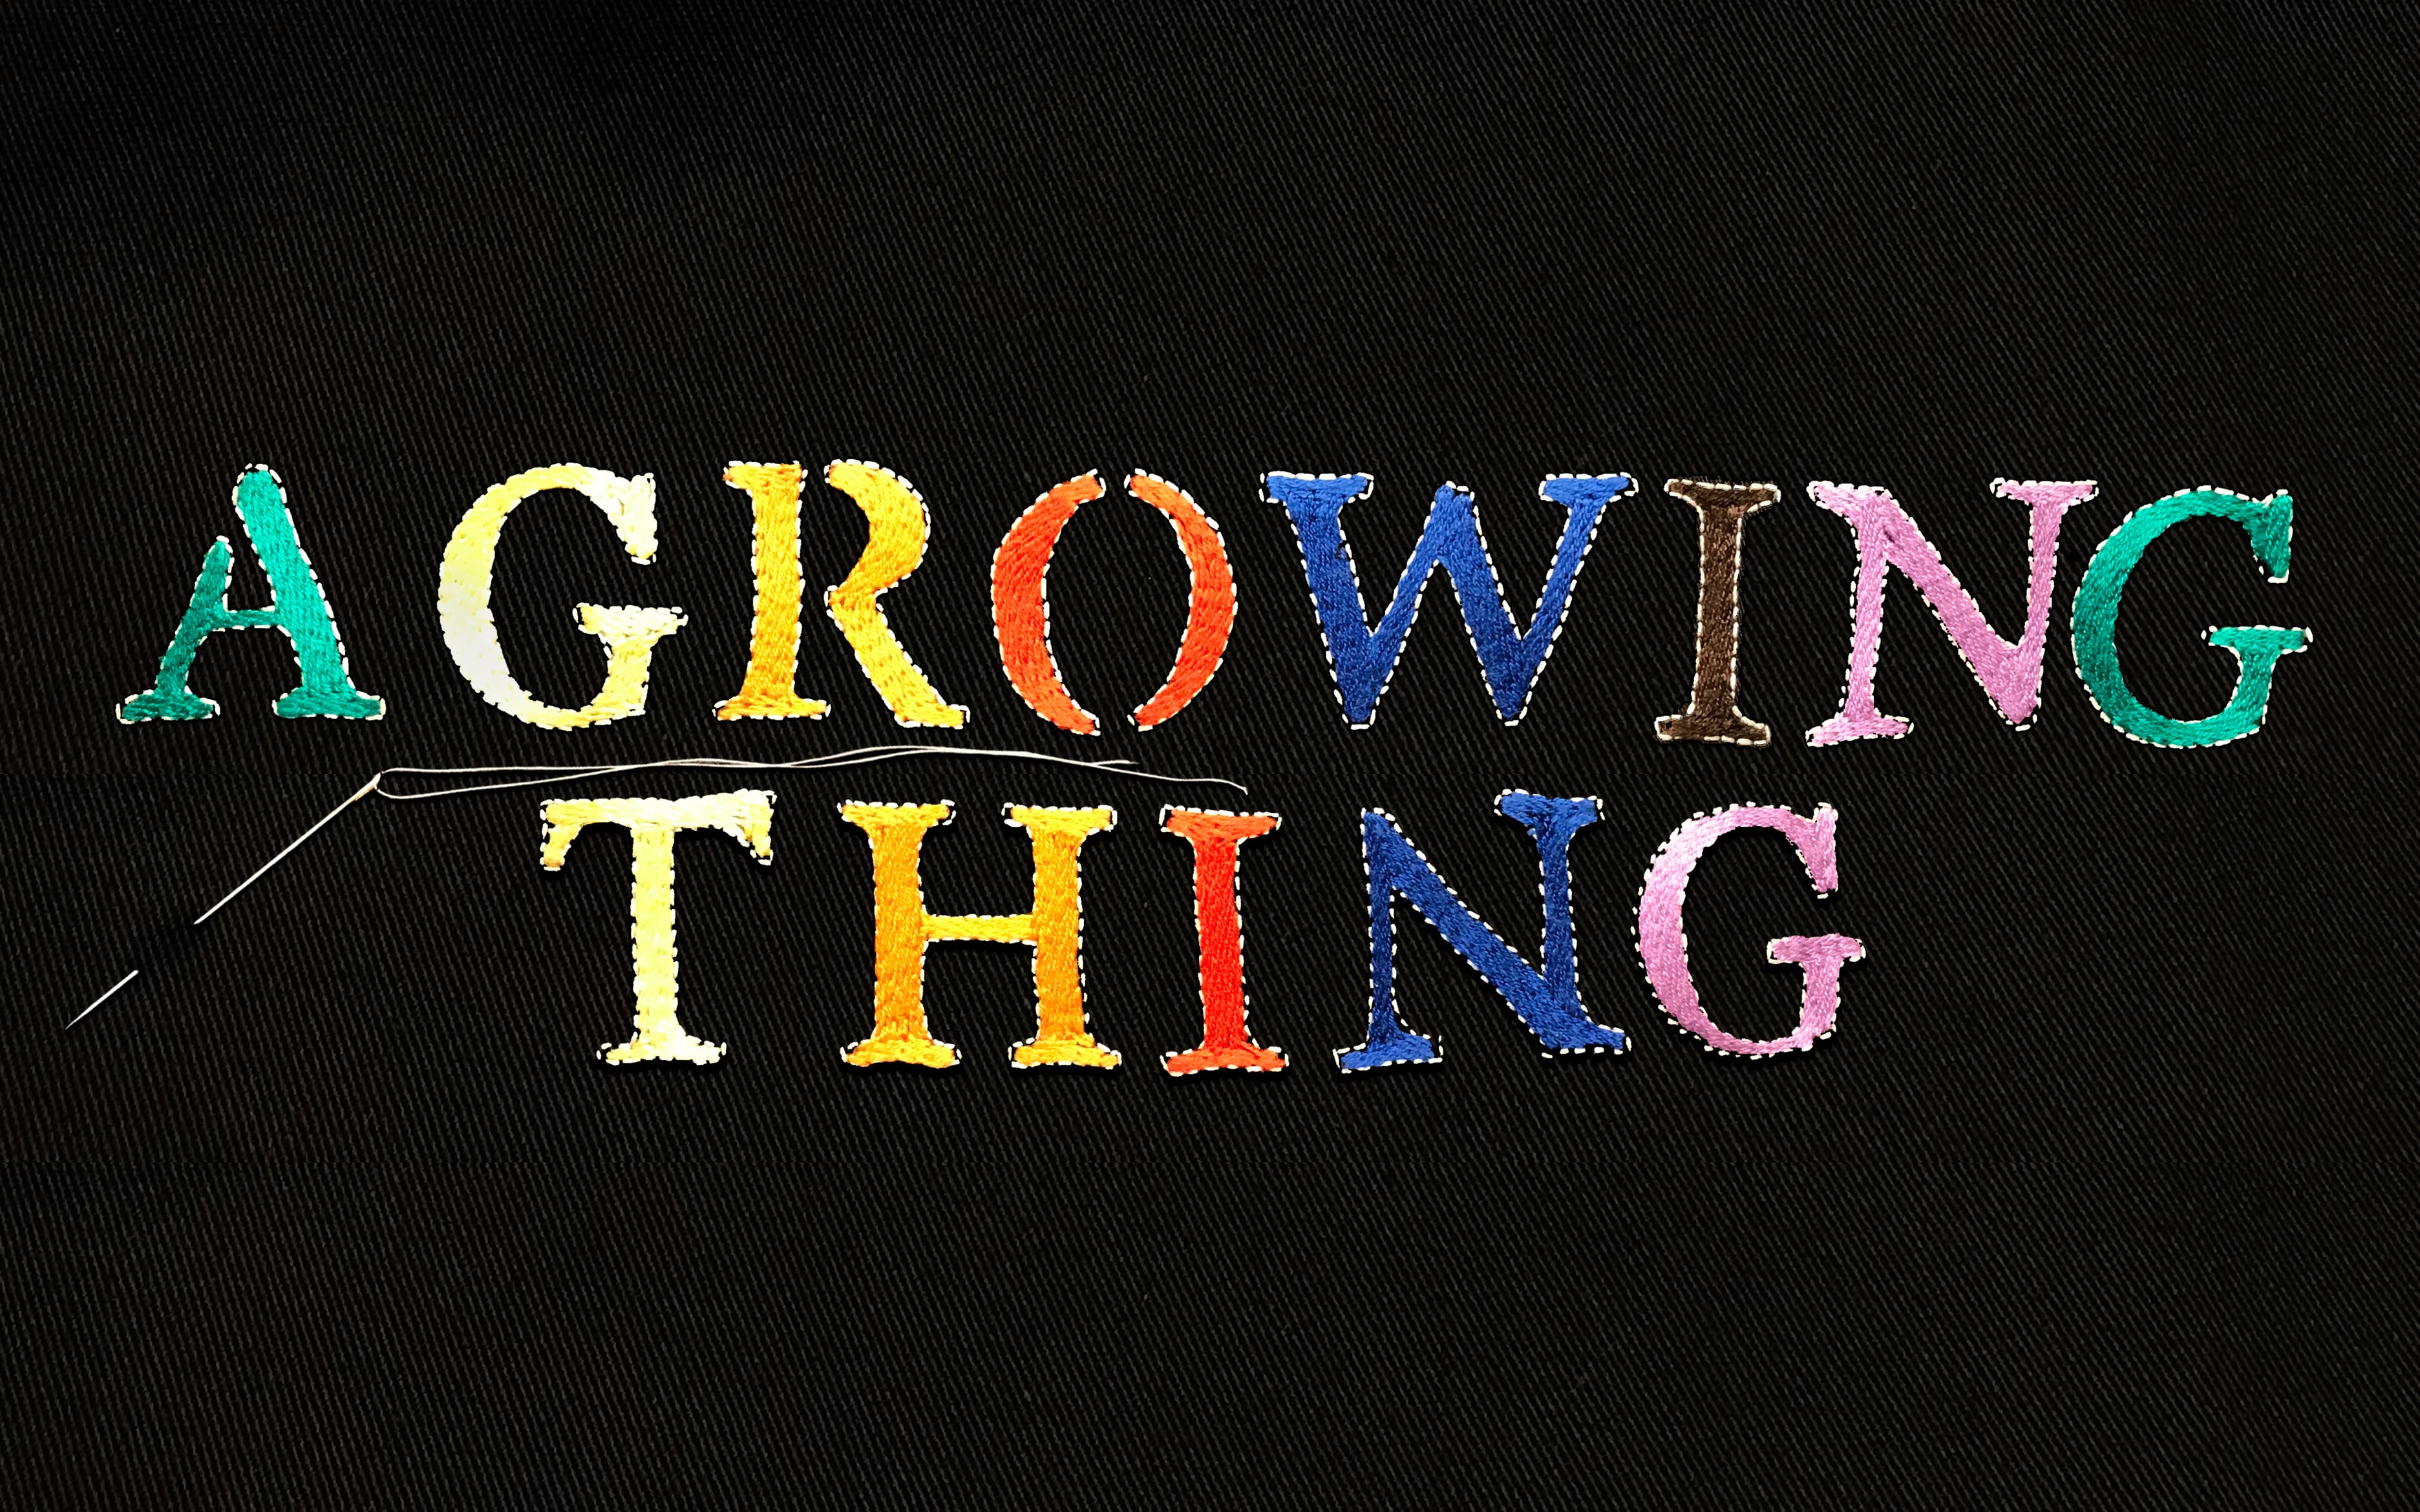 Watch A Growing Thing Online Vimeo On Demand on Vimeo